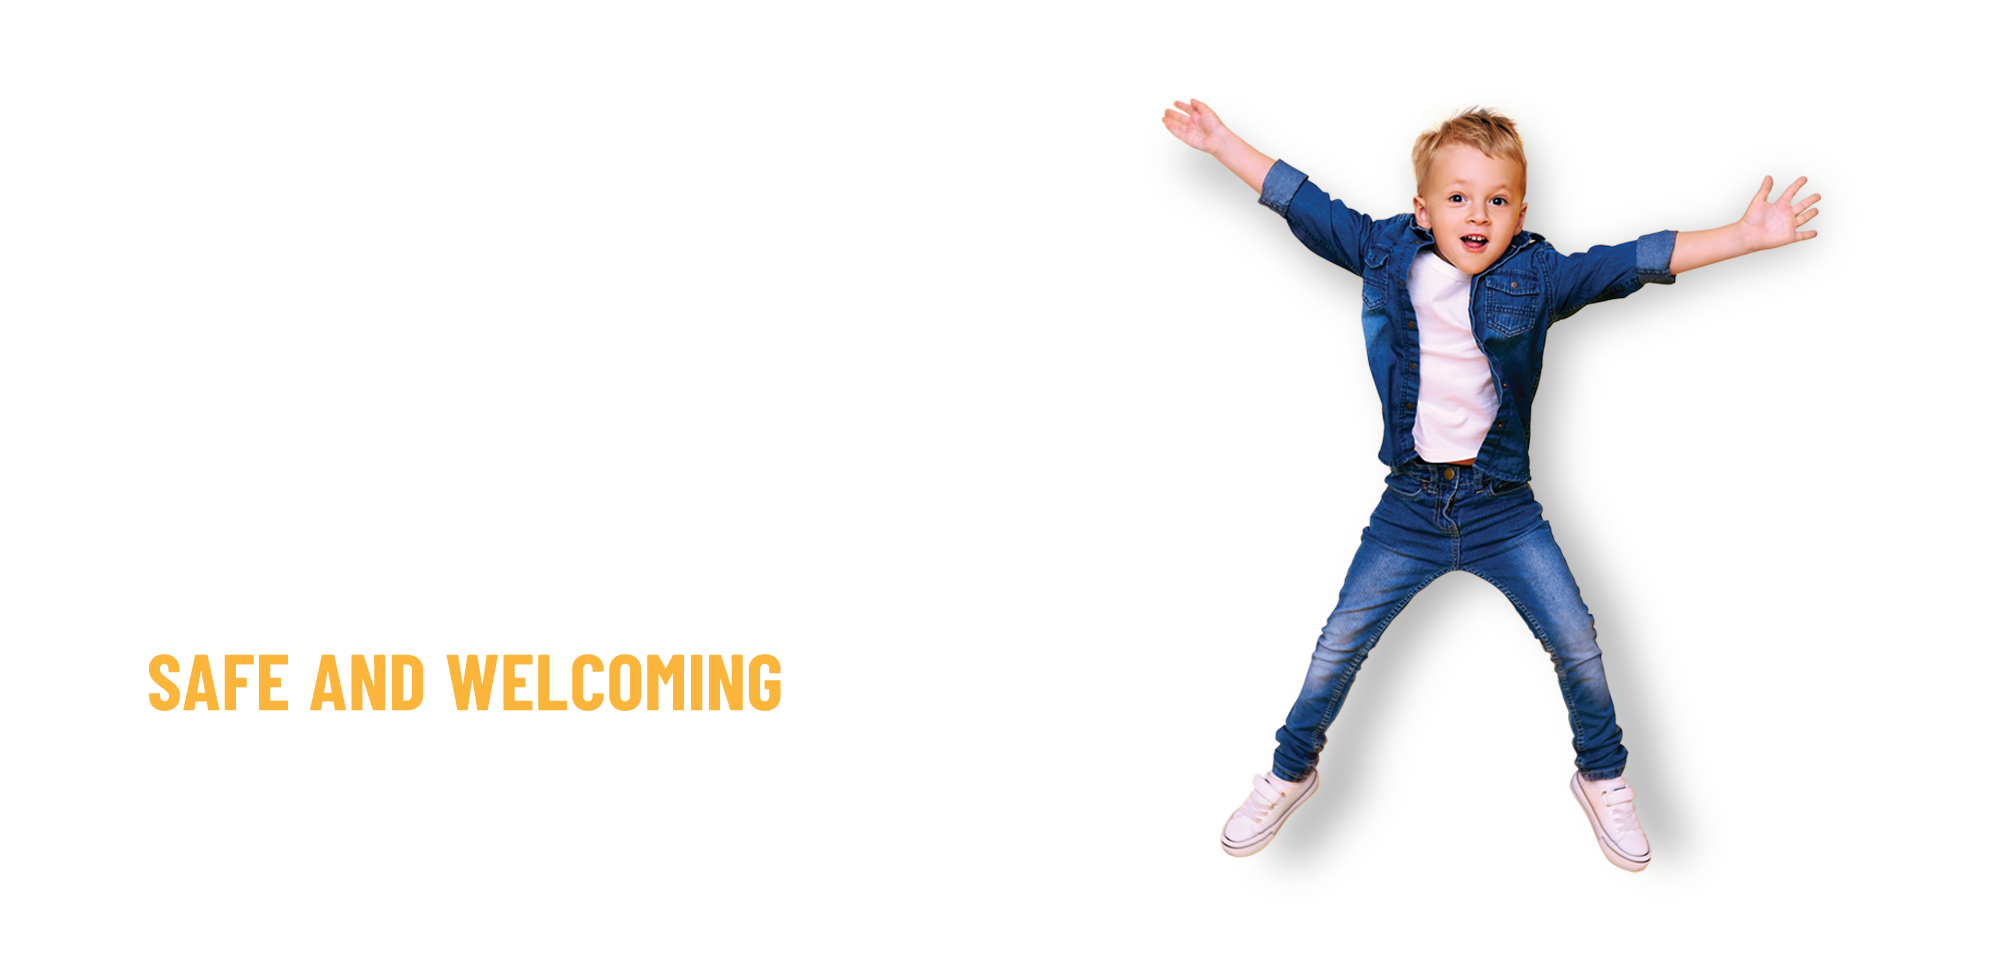 Well-Being - Safe and welcoming environment